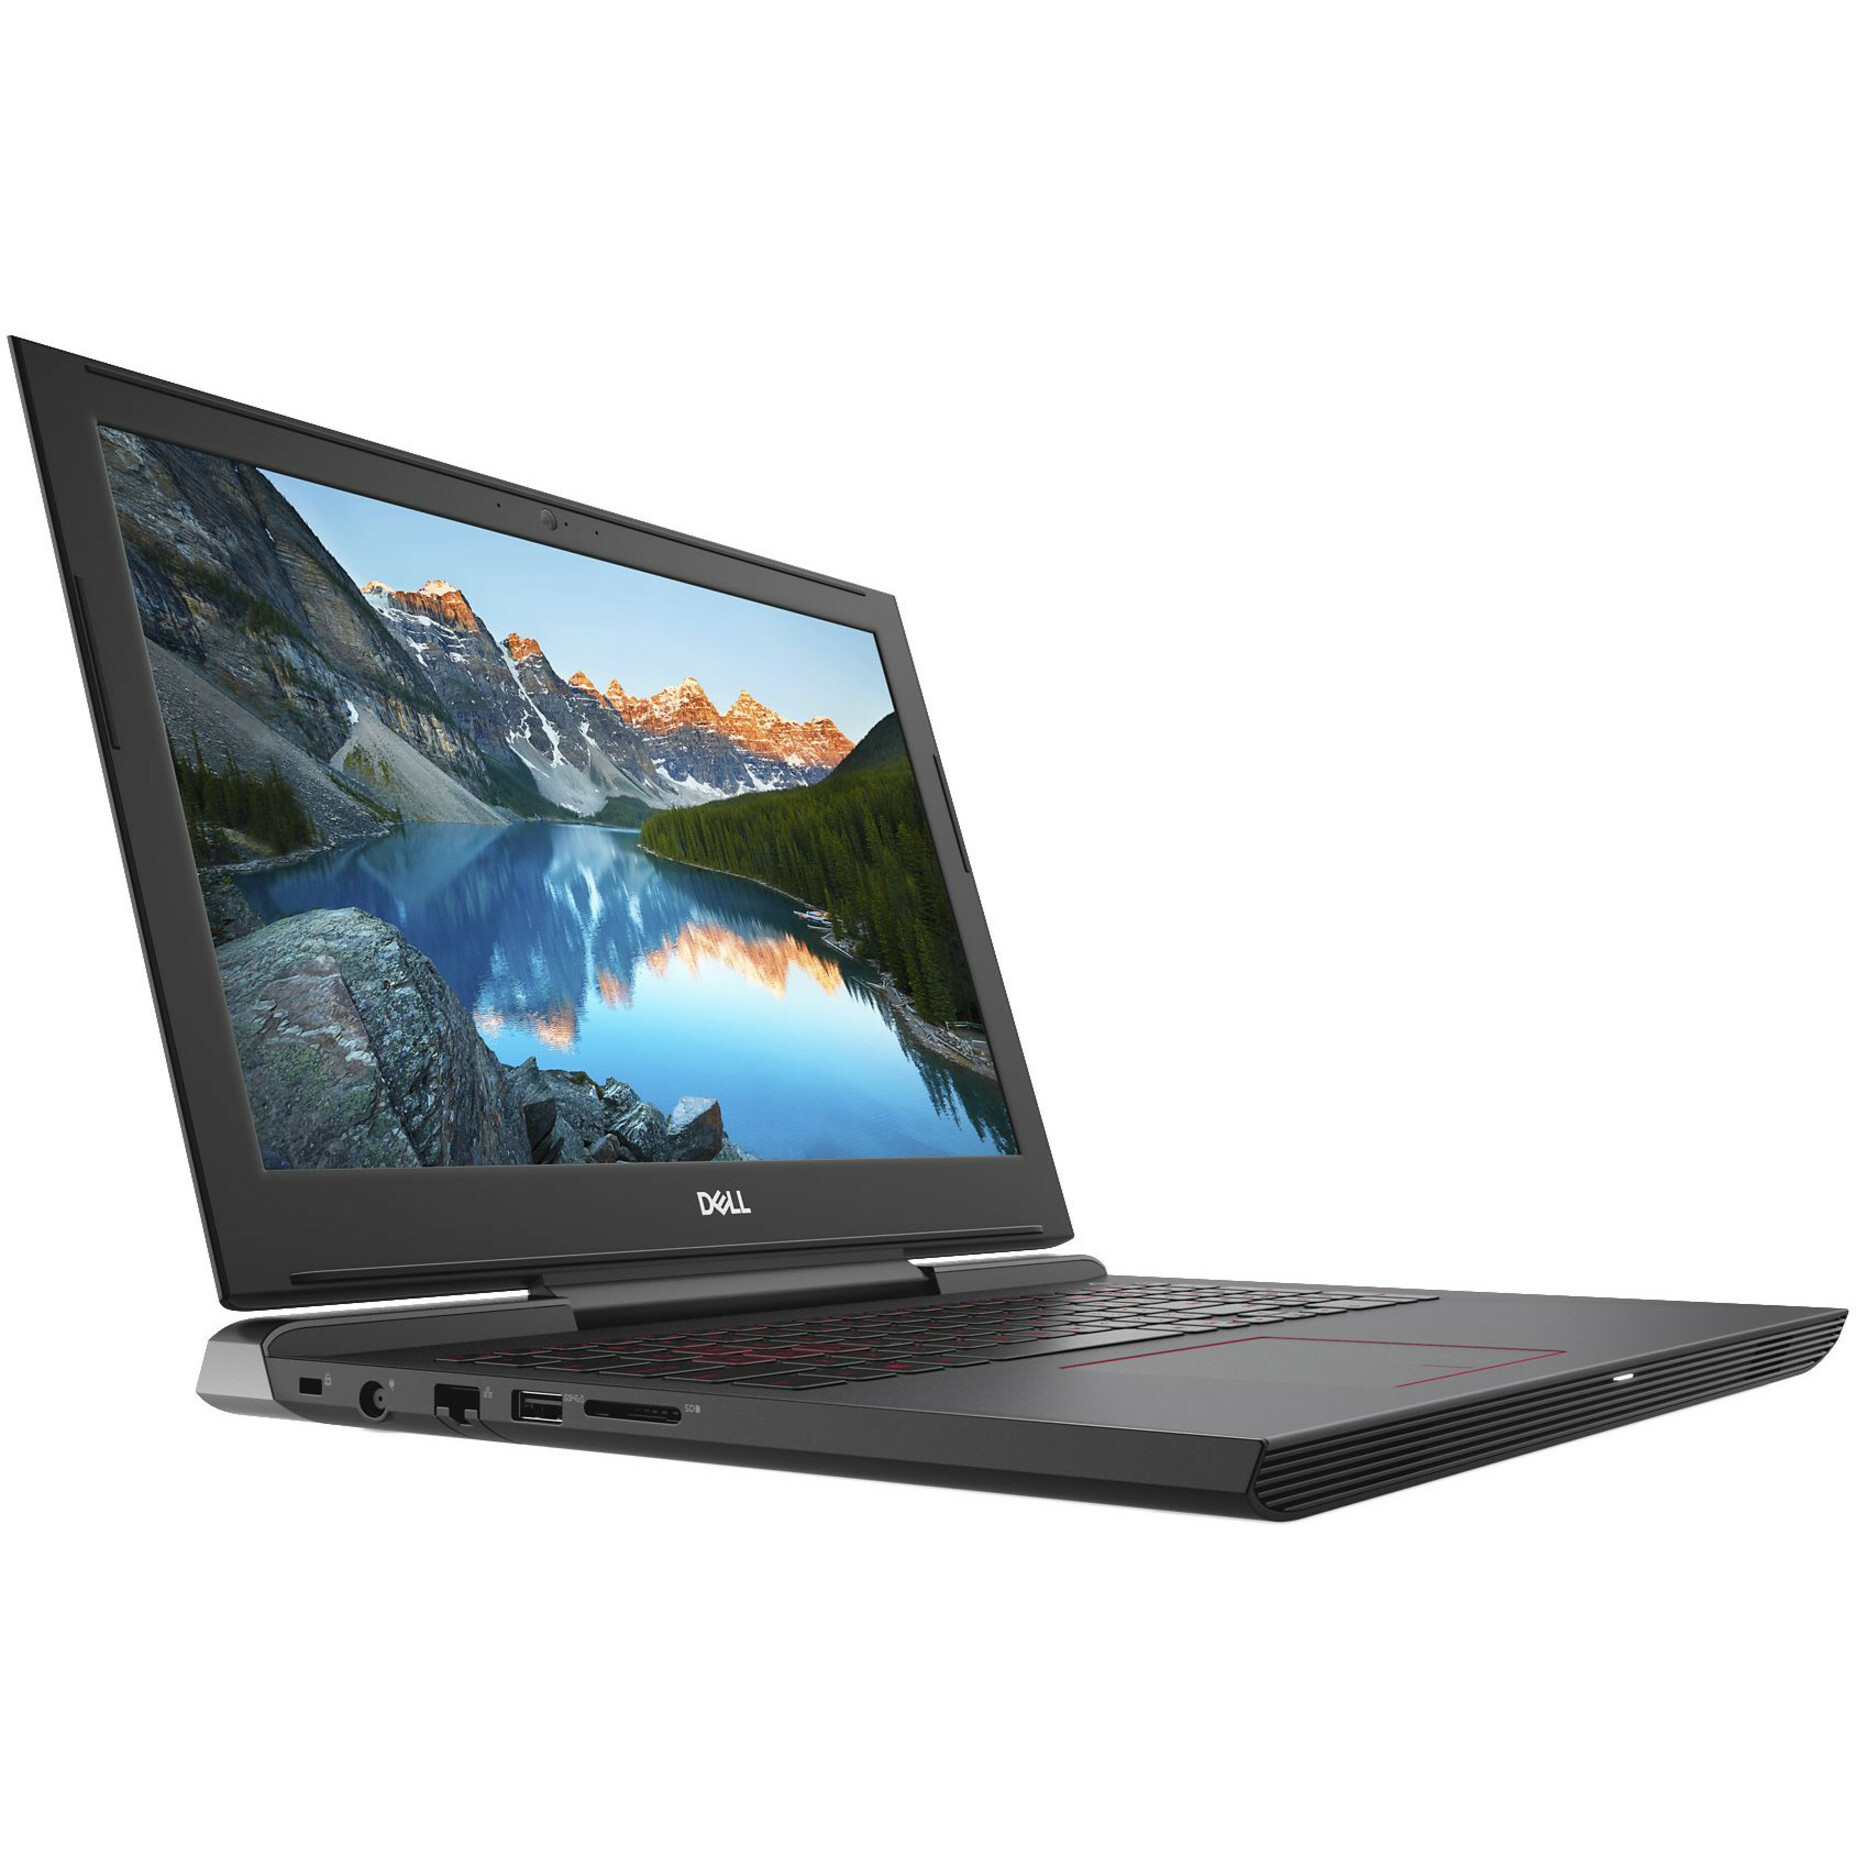 Dell Inspiron 15 7577 15.6 inch Gaming Laptop, Intel Core i5-7300HQ, 8GB Memory, 128GB Solid State Drive + 1TB HDD, NVIDIA® GeForce® GTX 1060 - image 20 of 23